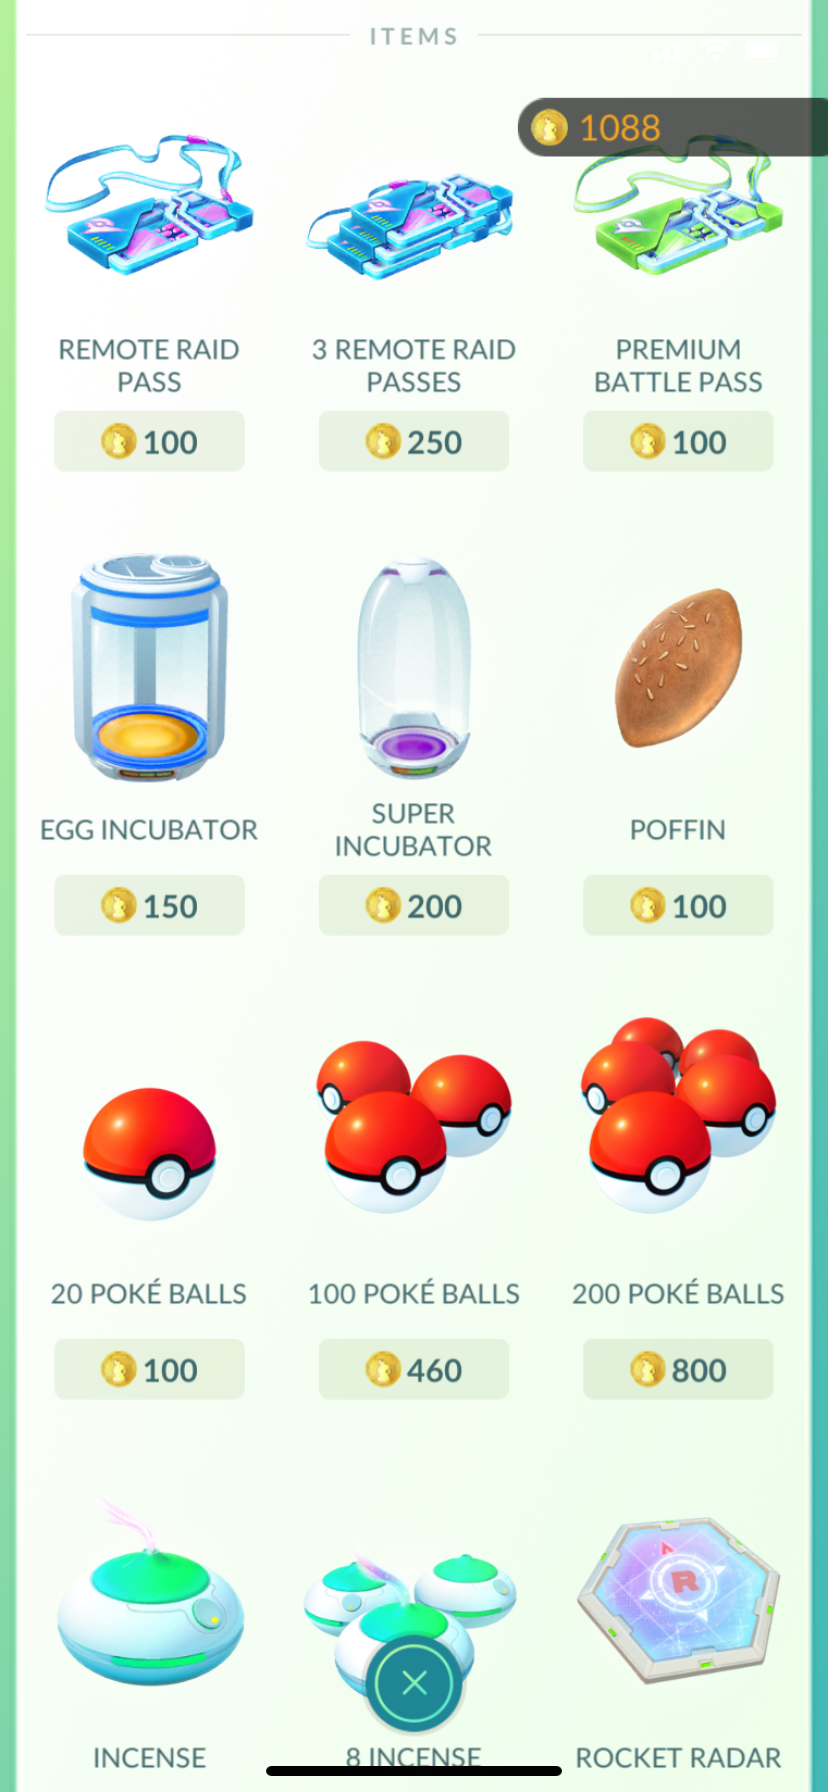 Pokemon Go: how to get coins and earn free Pokecoins